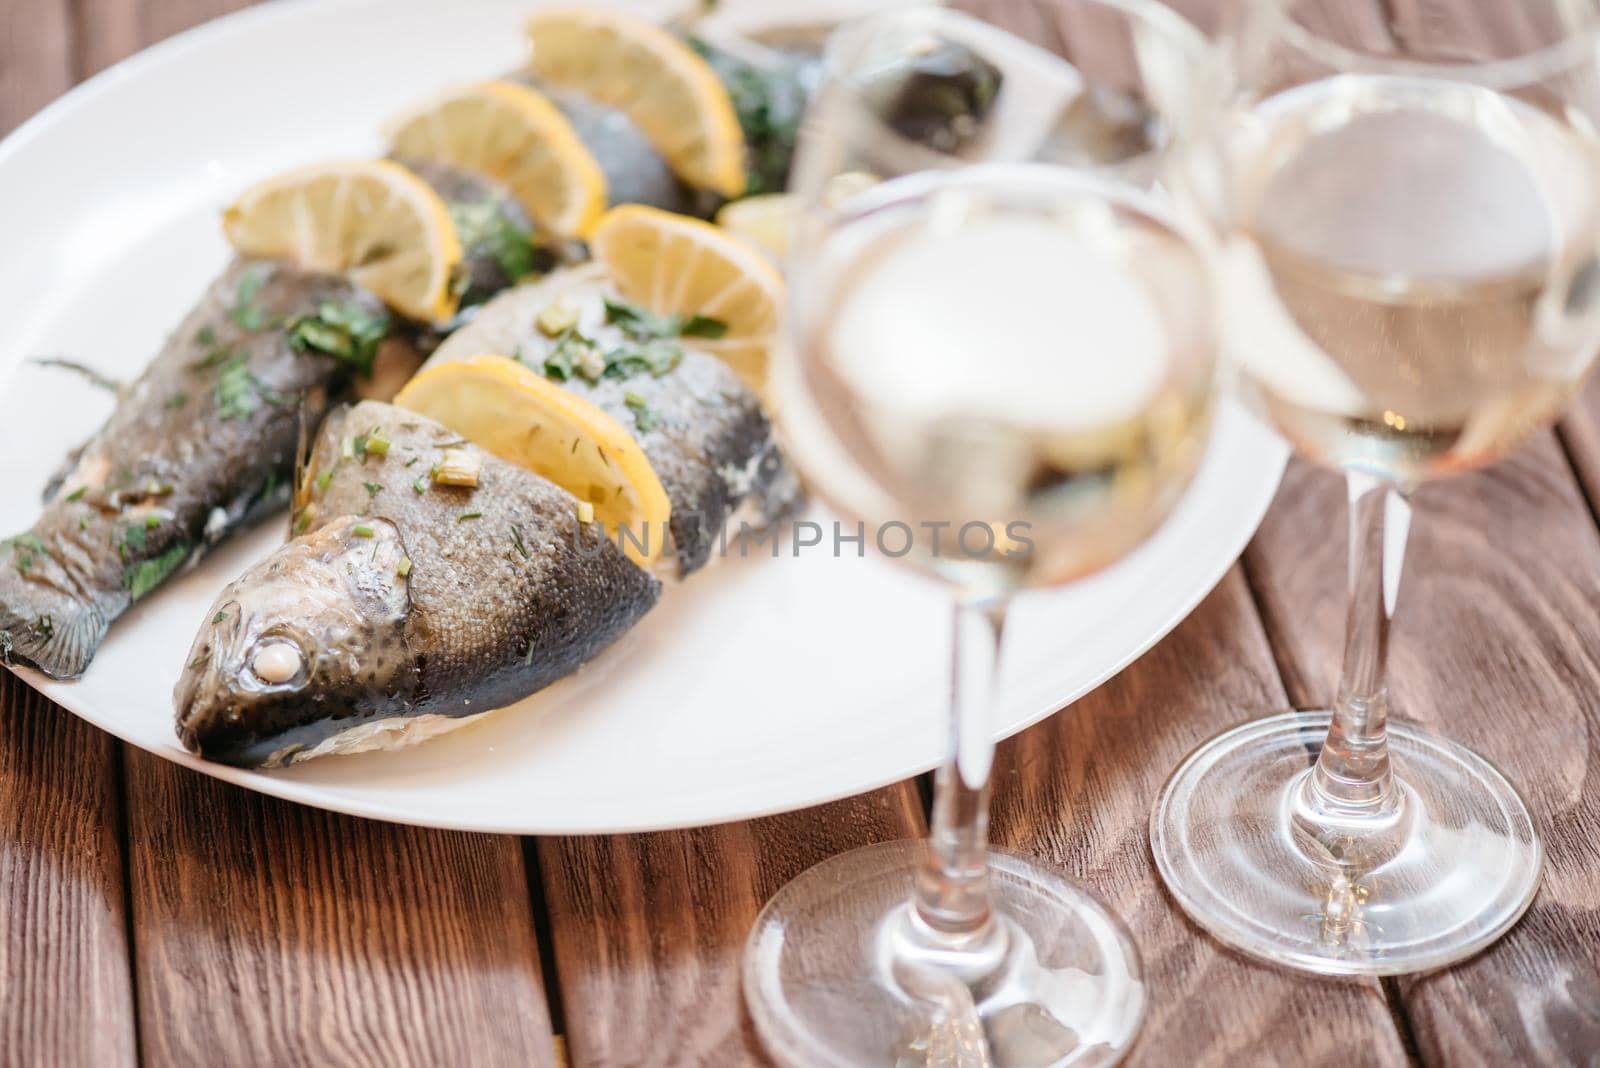 Simple fish dish with lemons and greenery on a white plate on wooden table with two glasses of white wine.